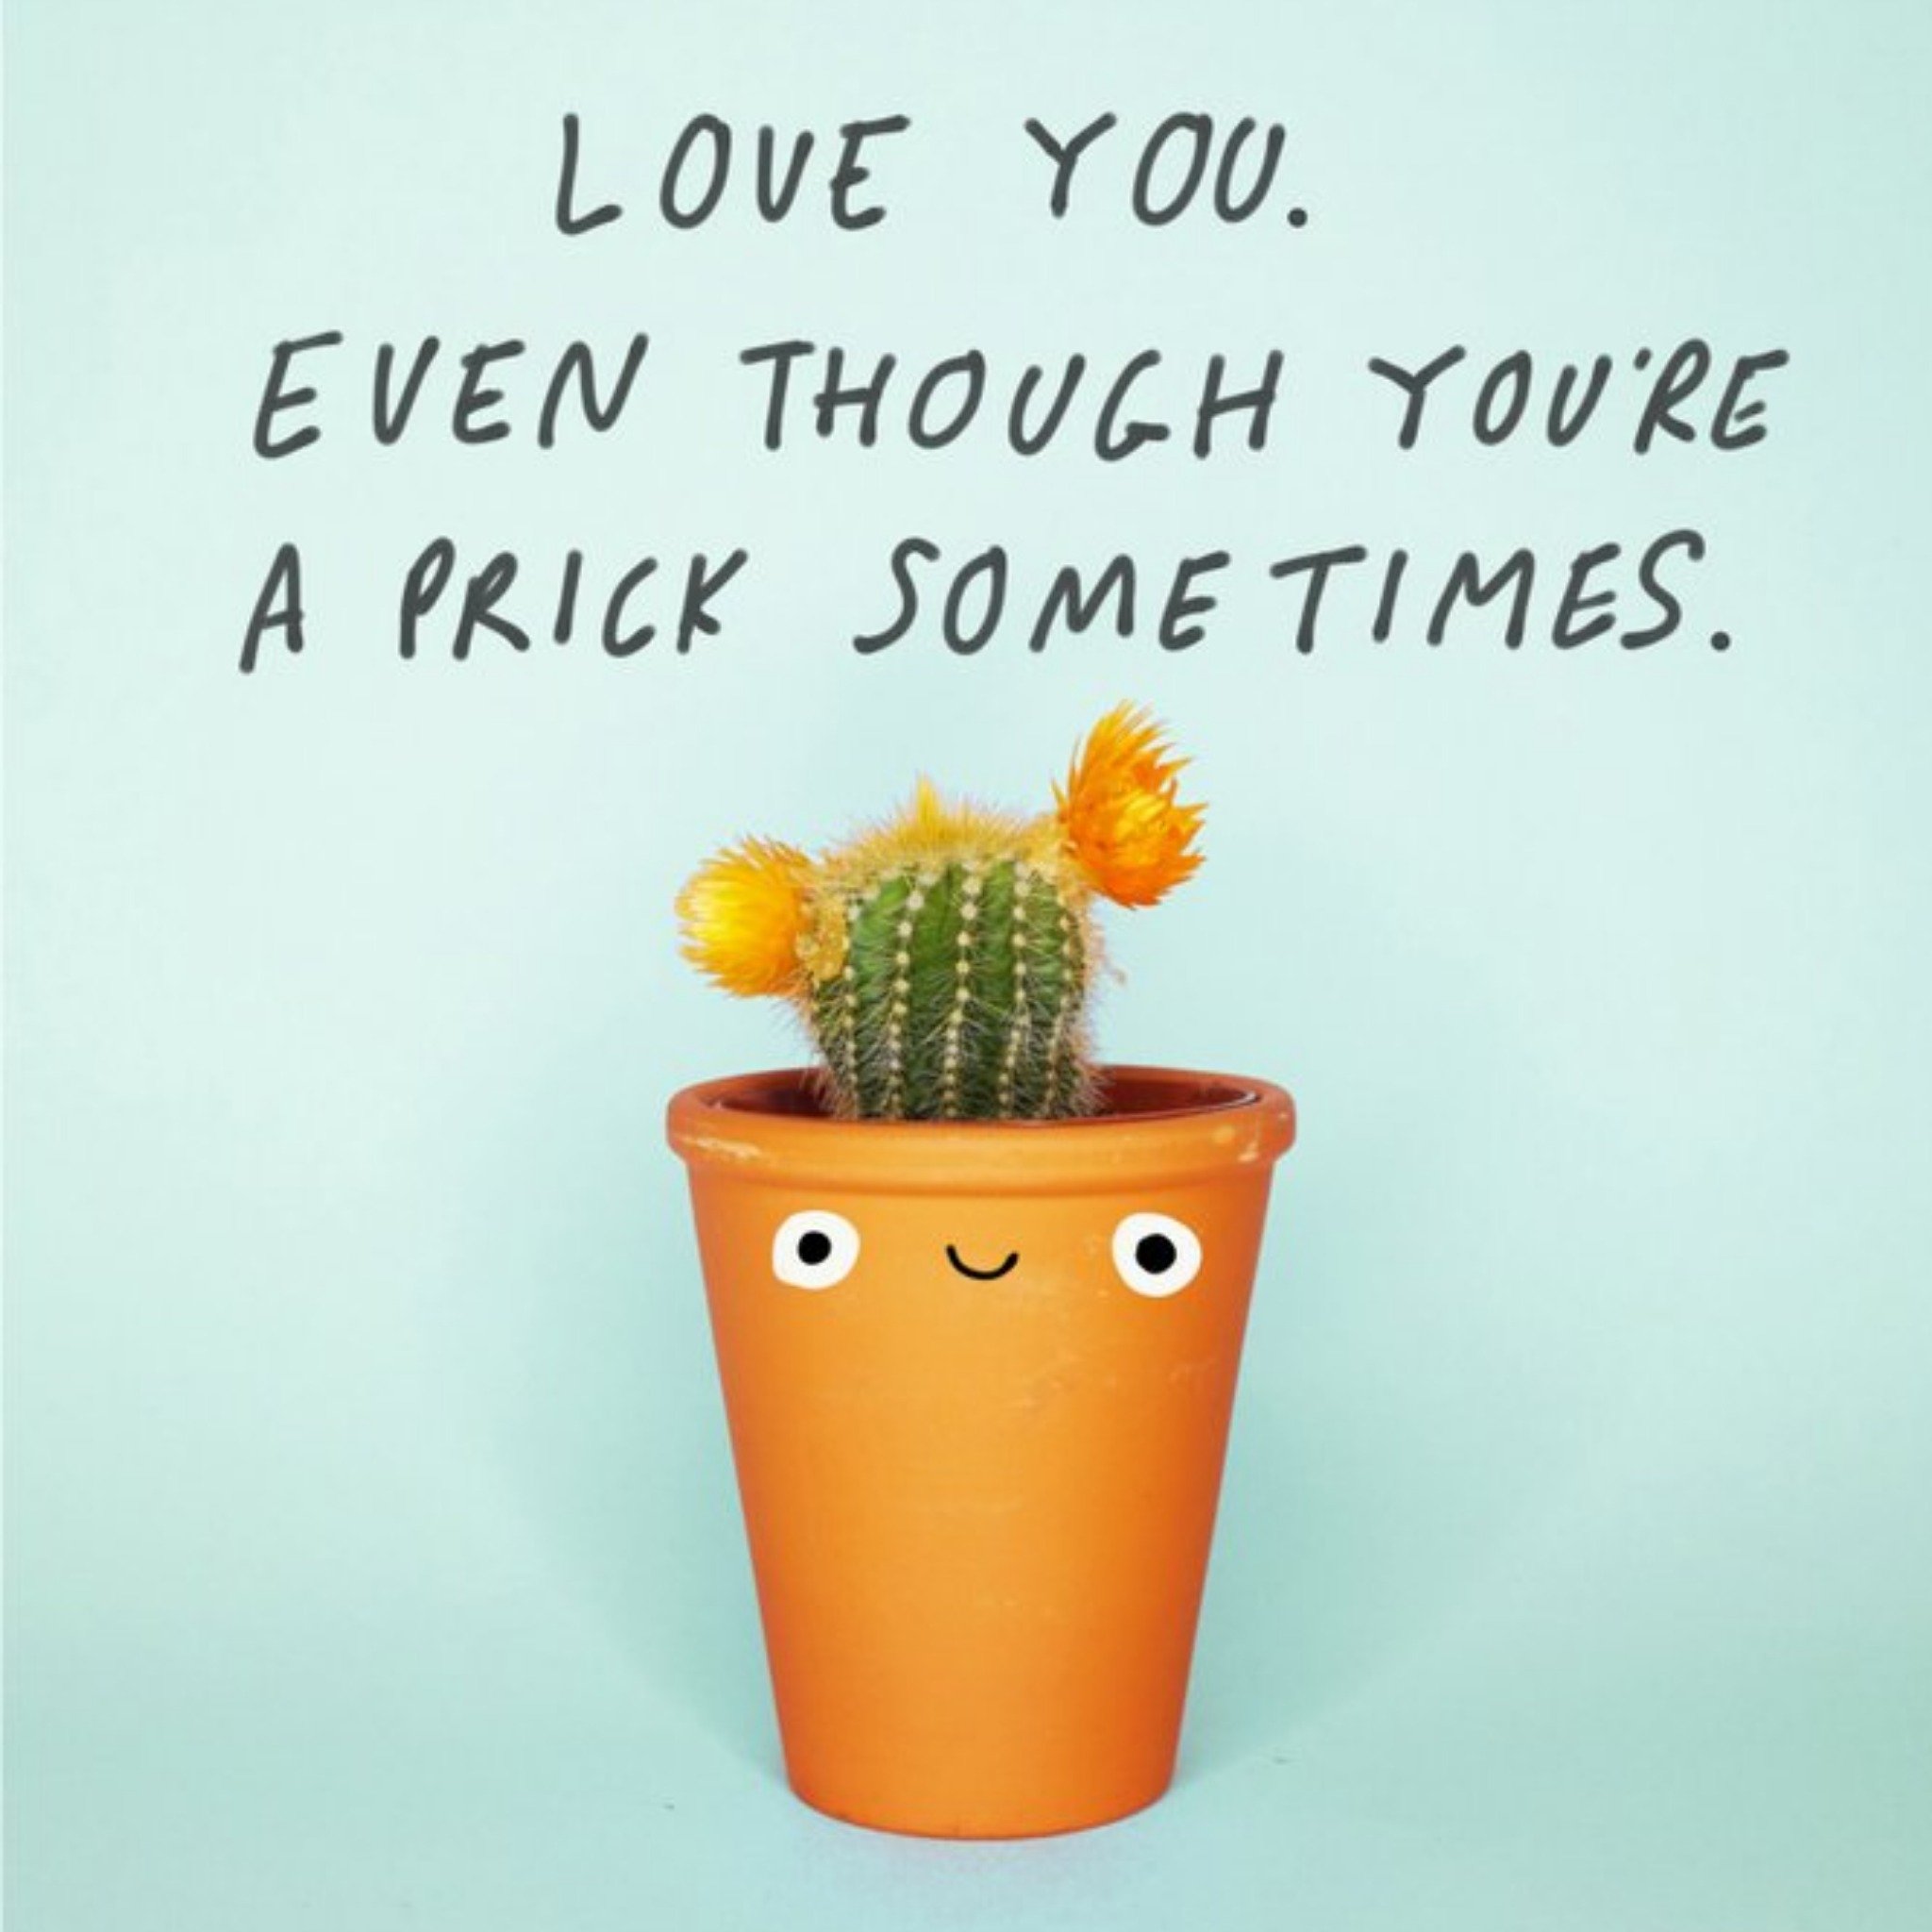 Jolly Awesome Love You Prick Card, Square